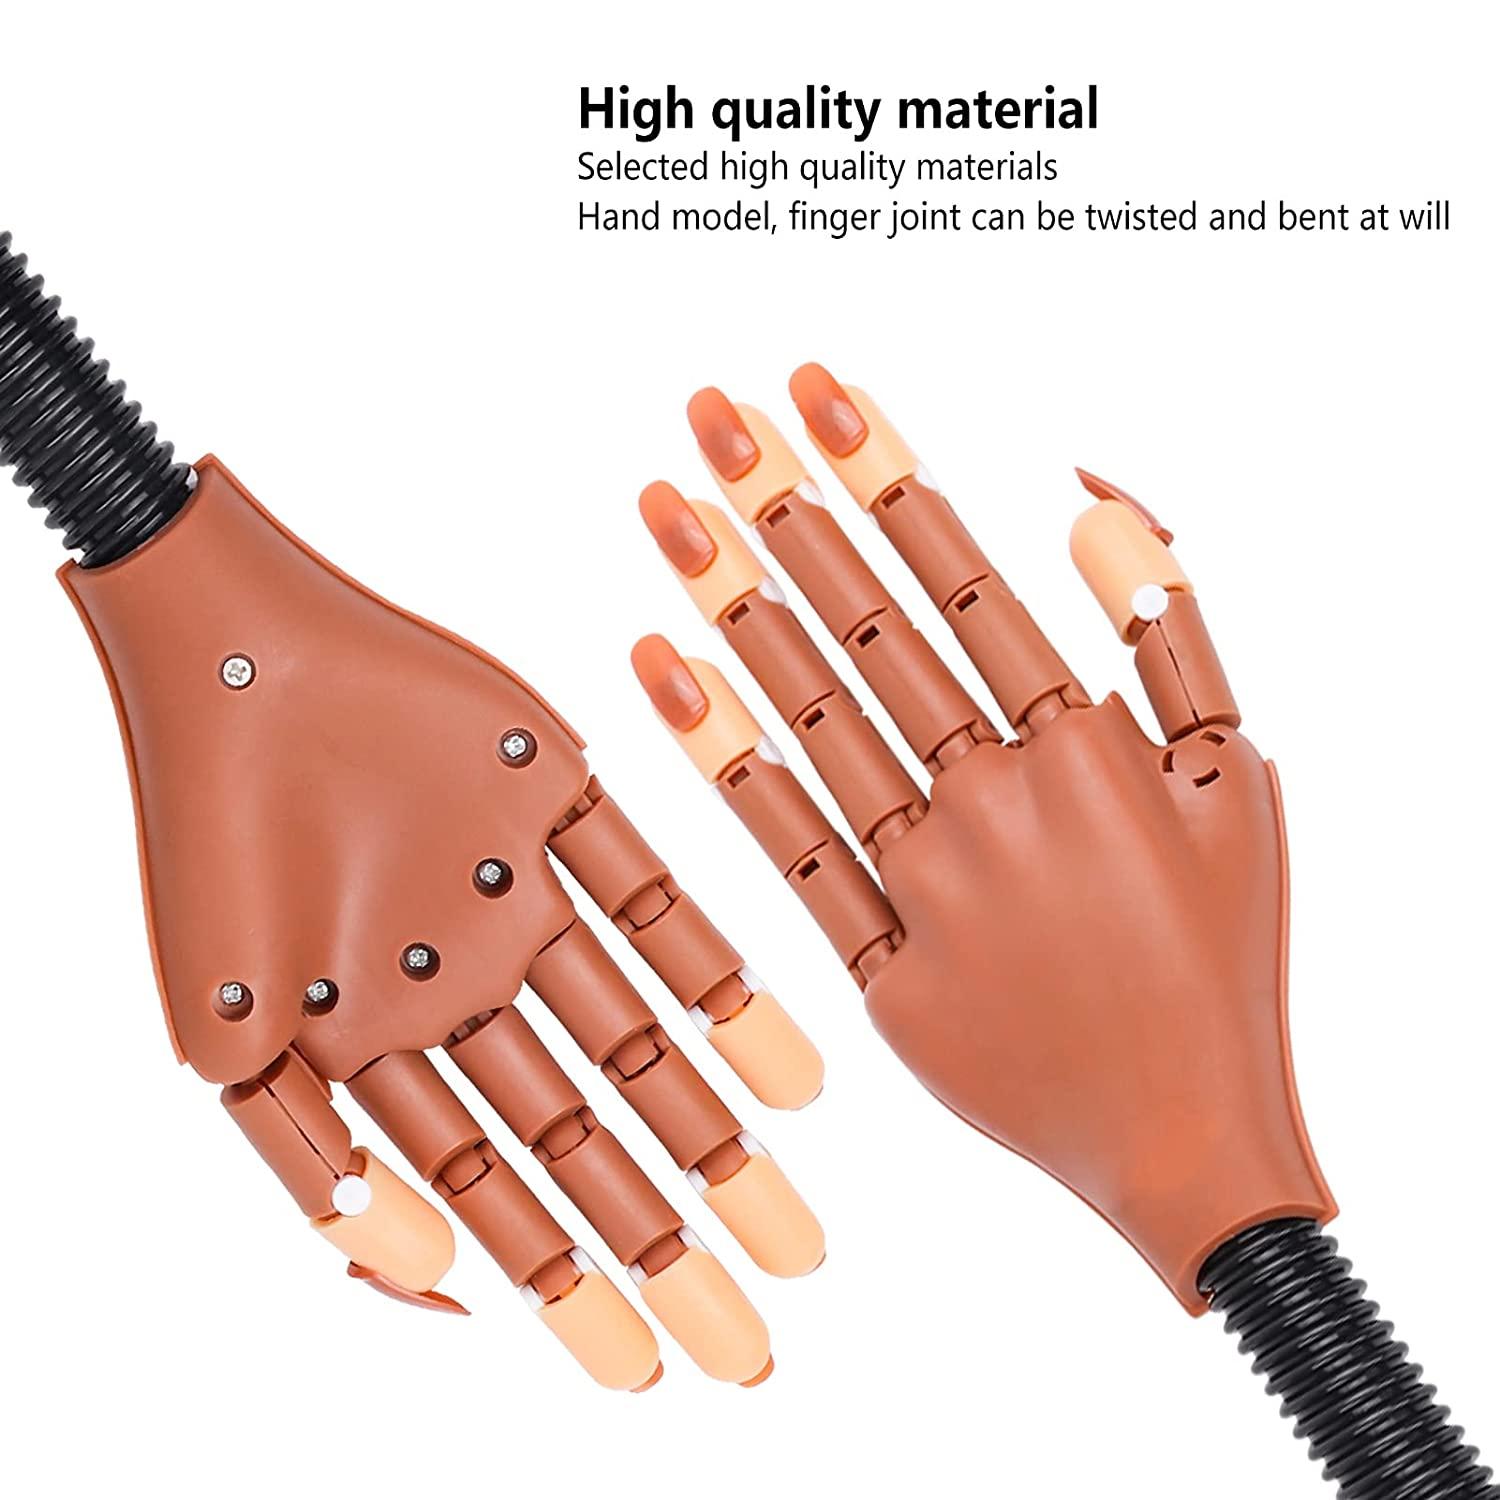 Yiesoum Practice Hand for Acrylic Nails, Flexible Never Fall Off Nail  Trainning Adjustable Hands Kits, Fake Hands for Nail Practice, Nail Display